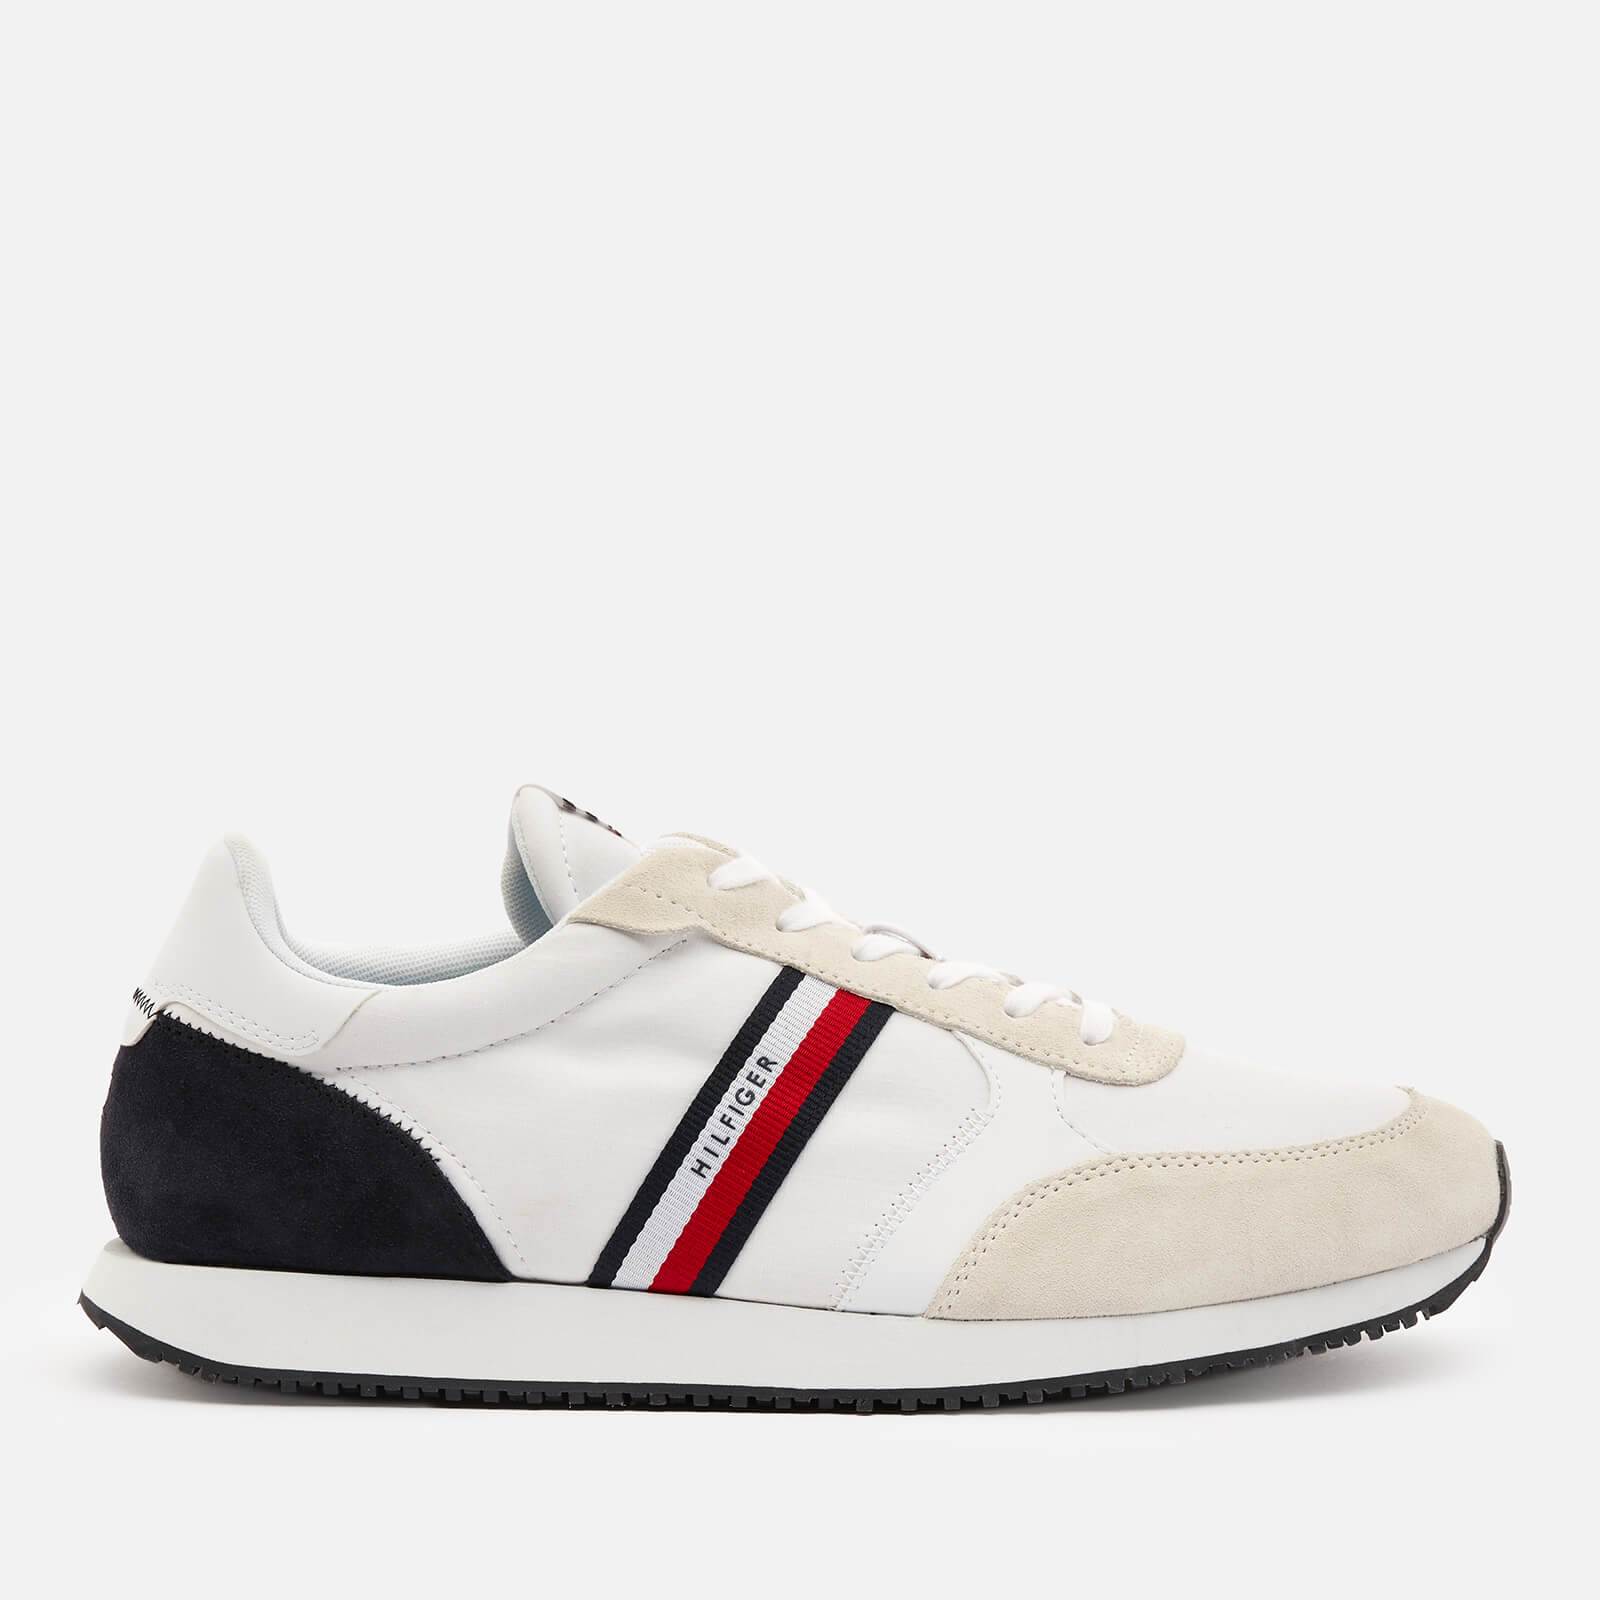 Tommy Hilfiger Men's Lo Mix Stripes Running Style Trainers - White - UK 7